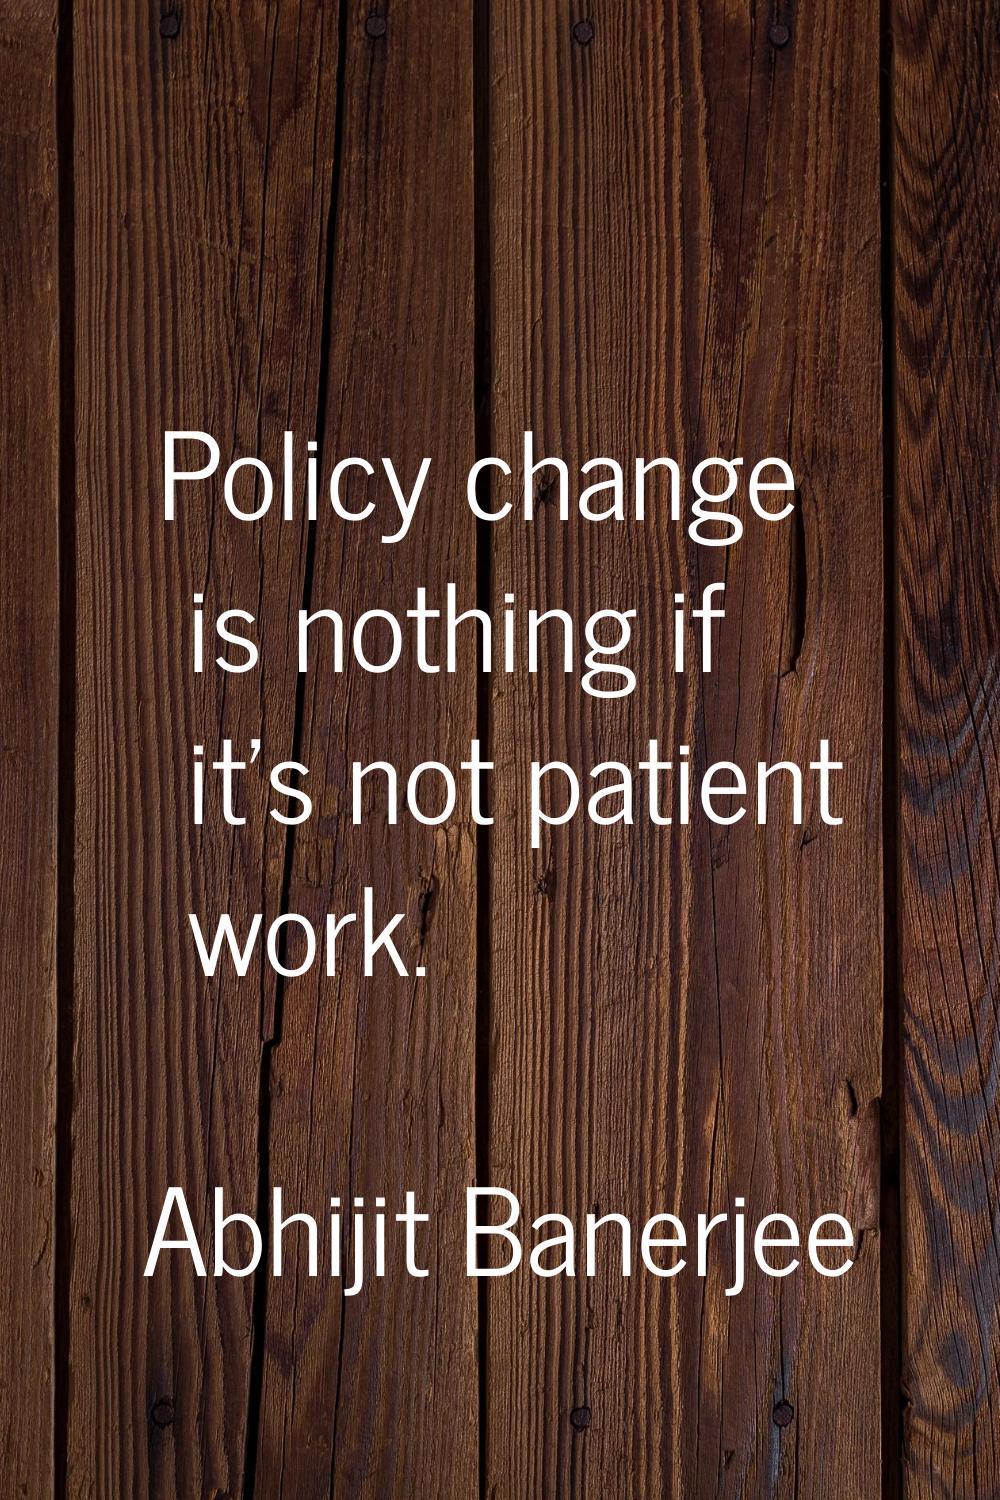 Policy change is nothing if it's not patient work.